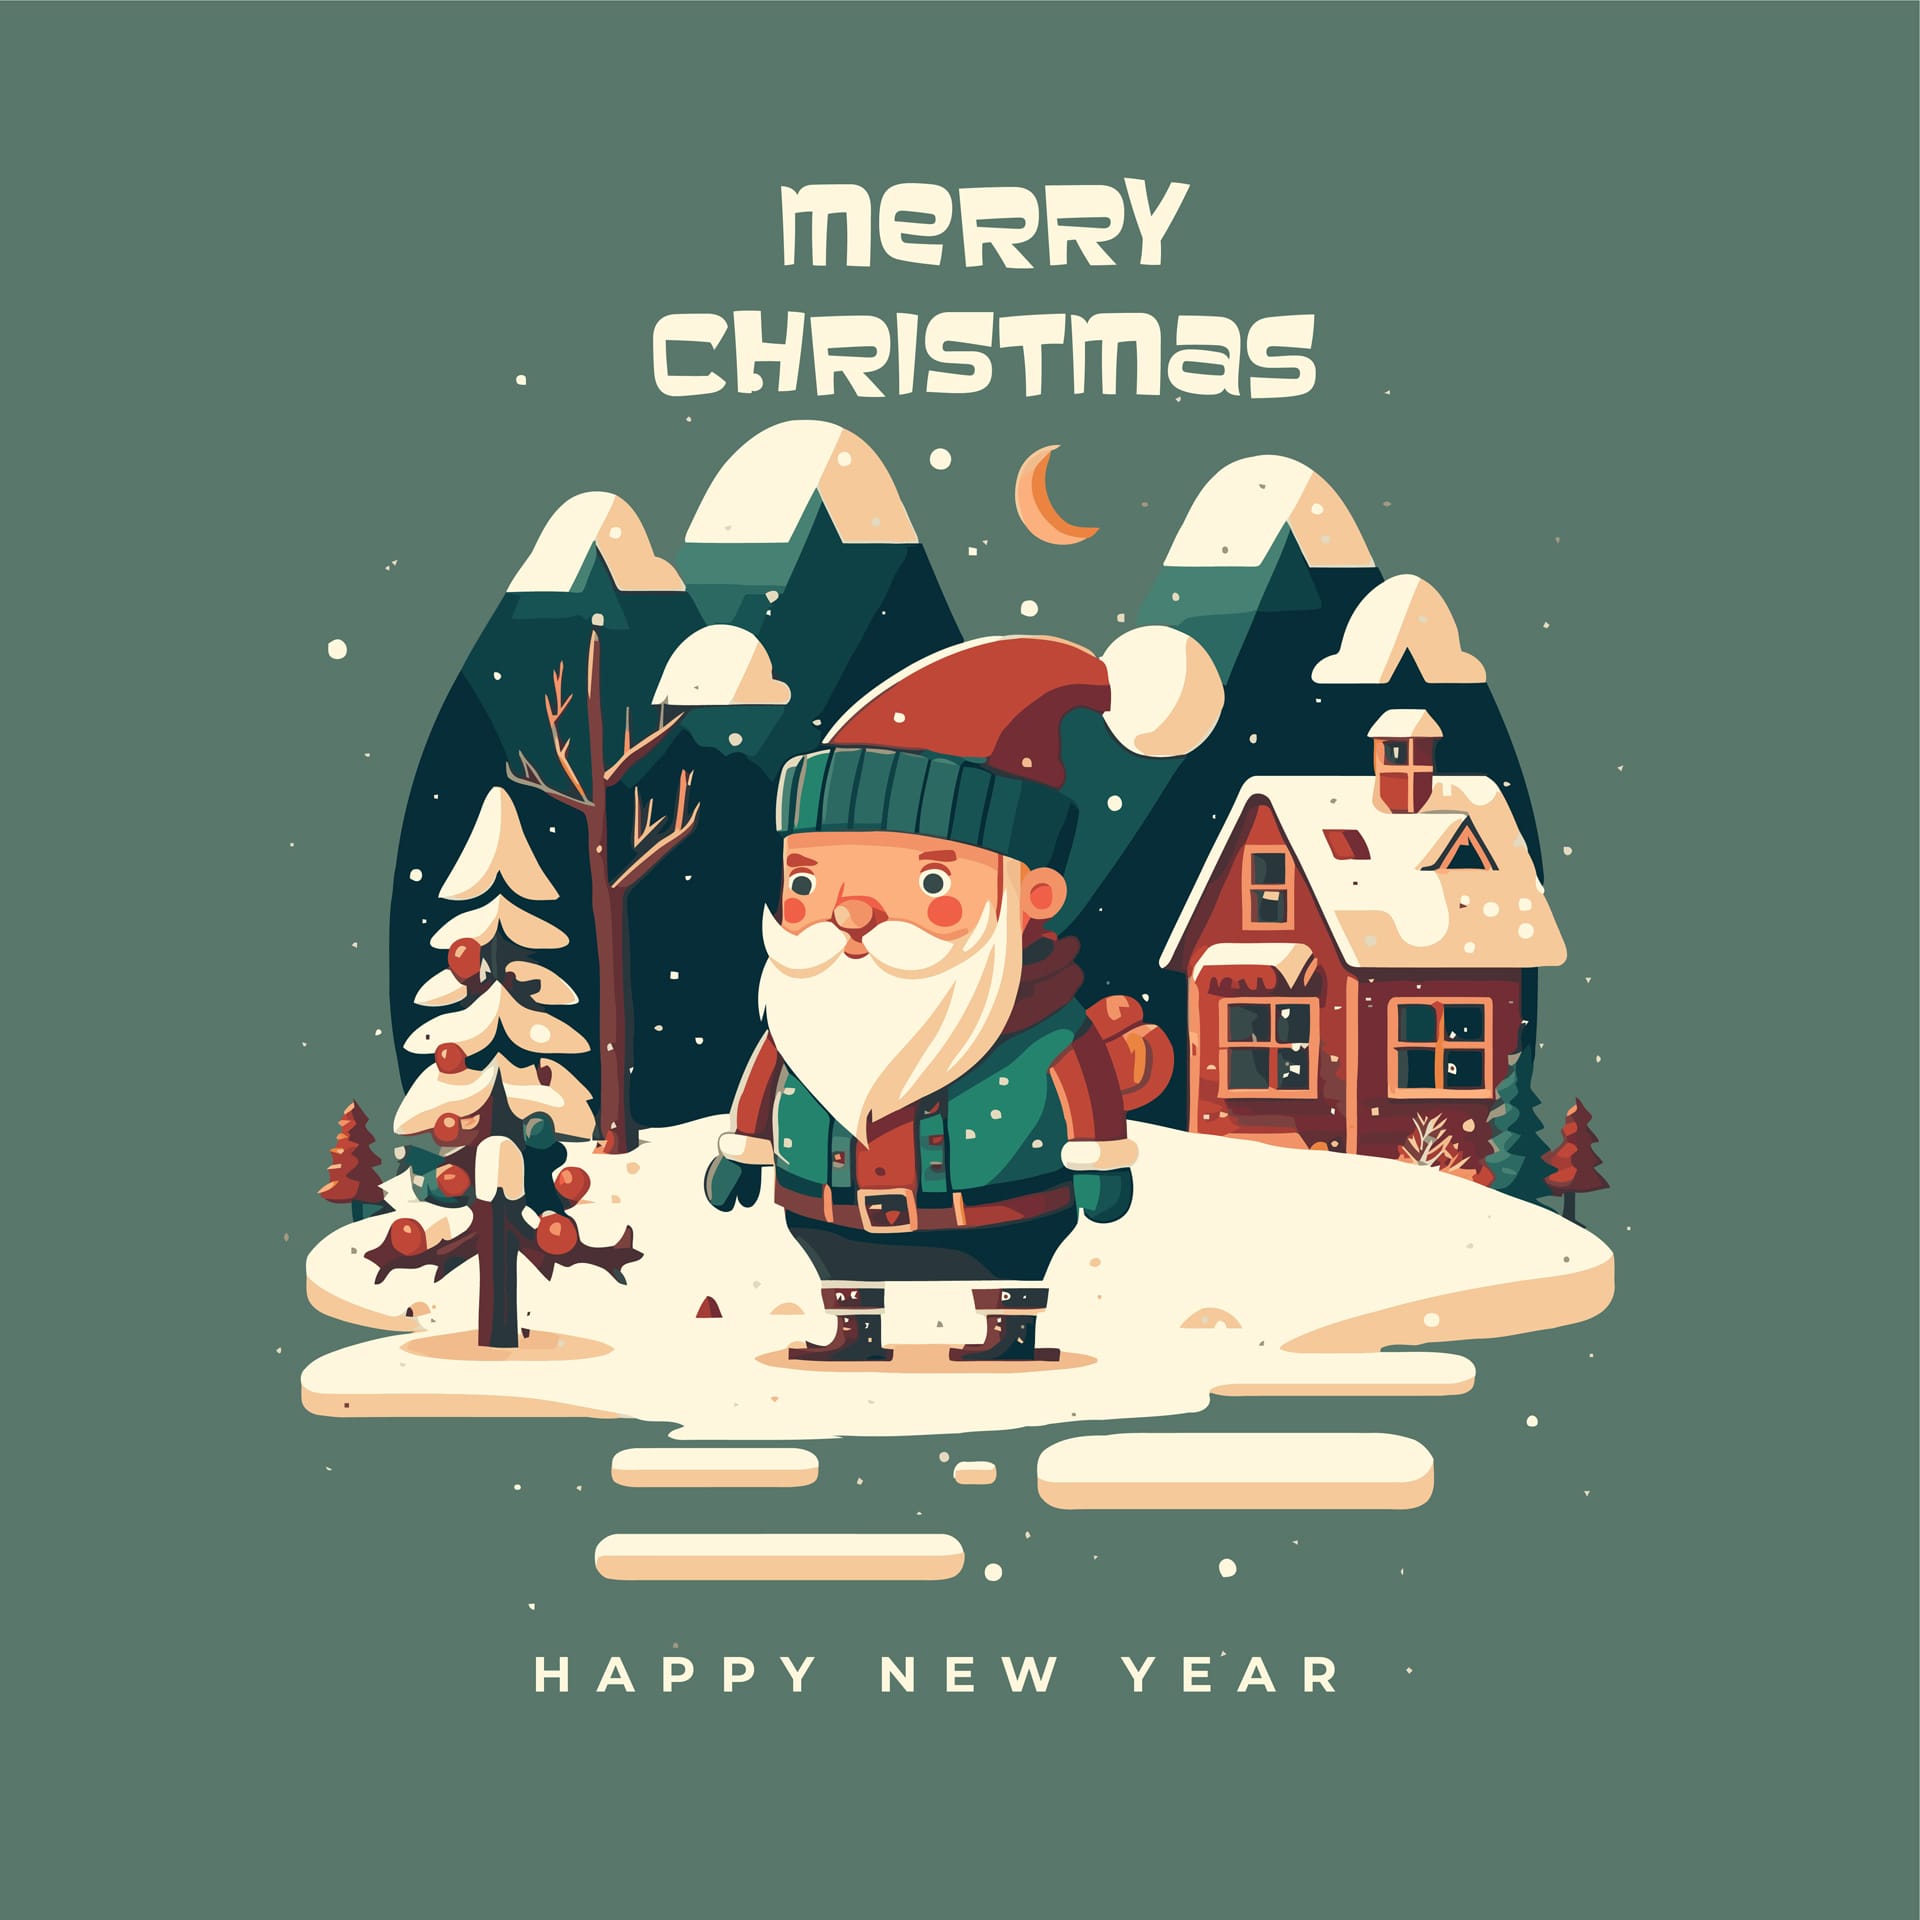 Merry christmas happy new year greetings card invitation banner flat